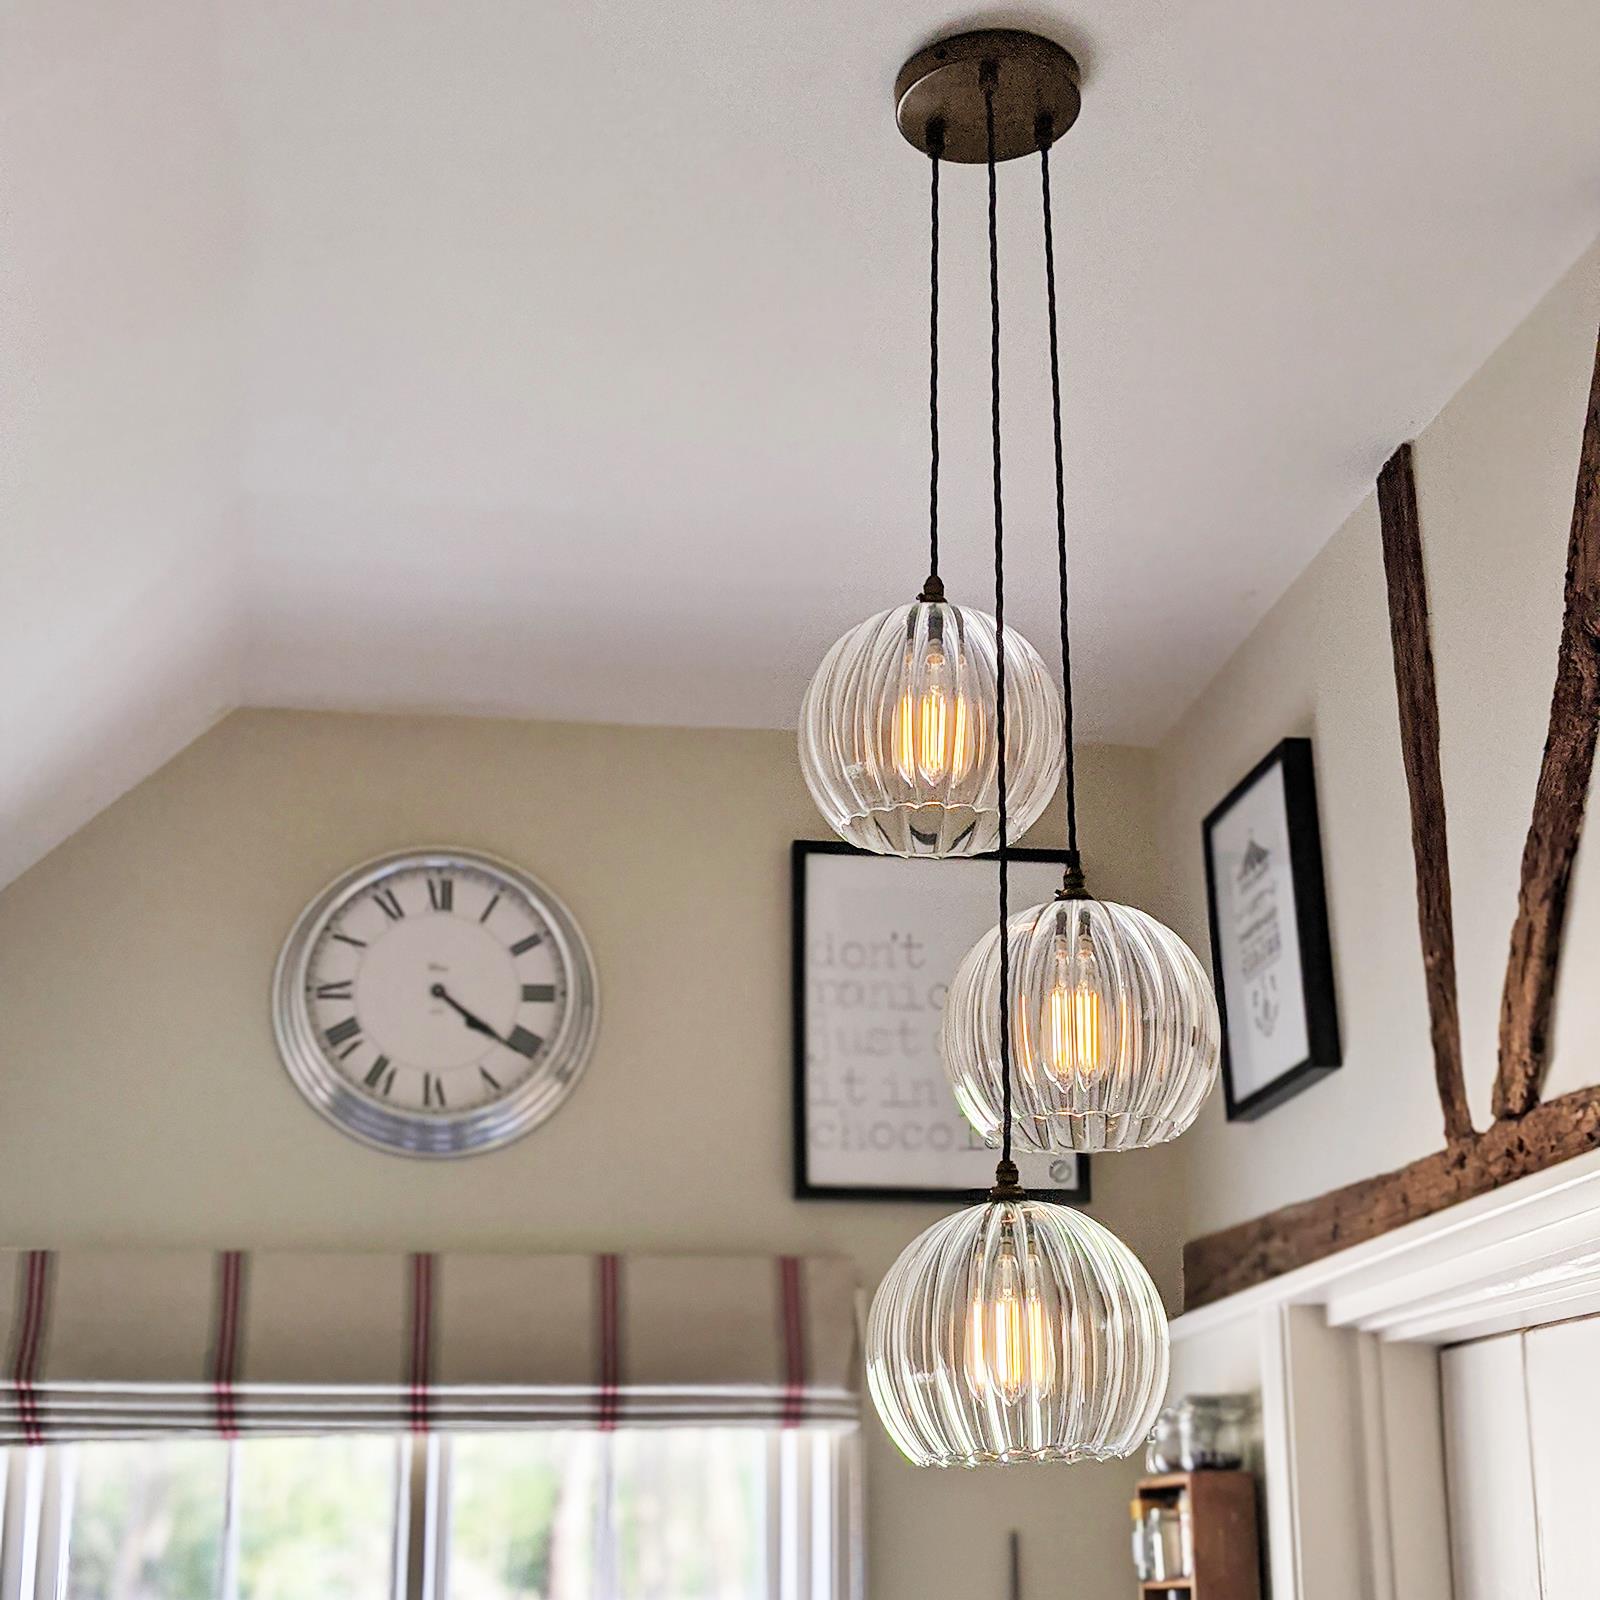 Up to the Task? How to choose the right size pendant light